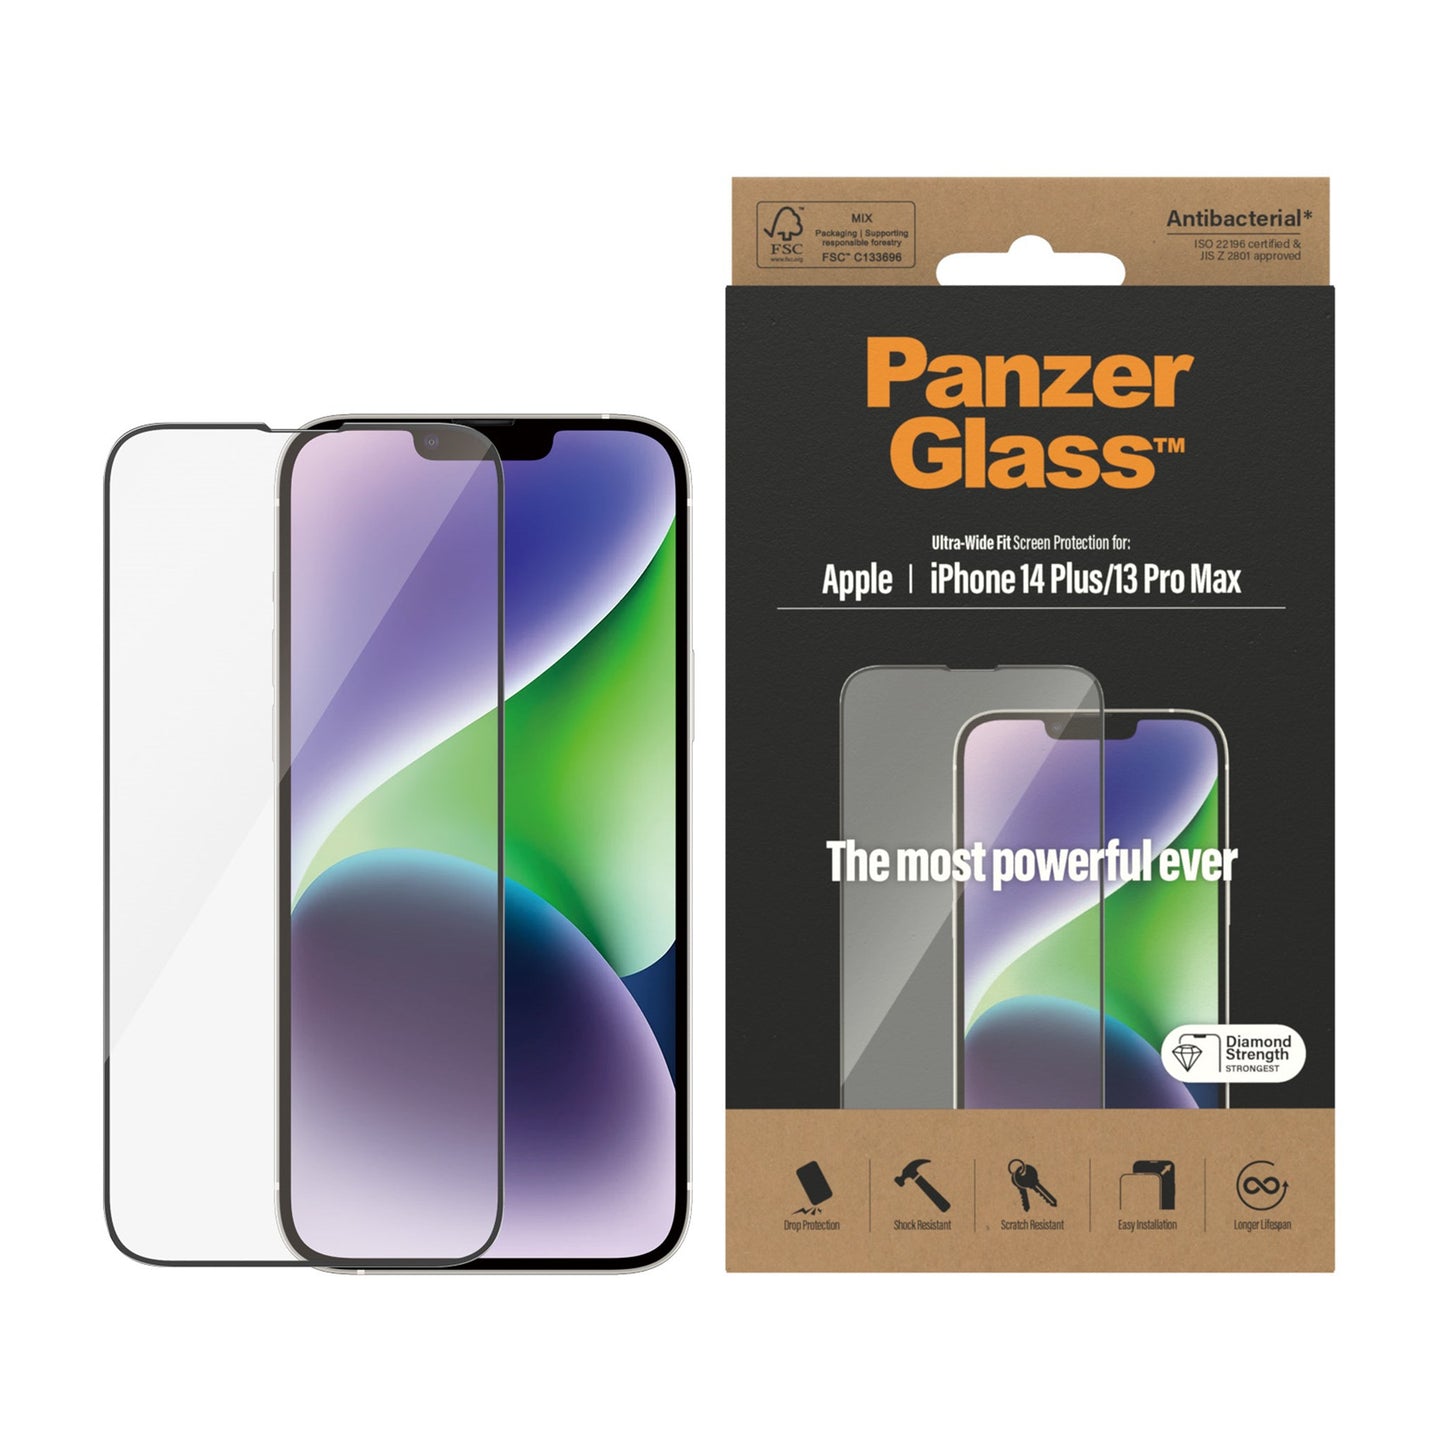 PanzerGlass® Screen Protector Apple iPhone 14 Plus | 13 Pro Max | Ultra-Wide Fit 2